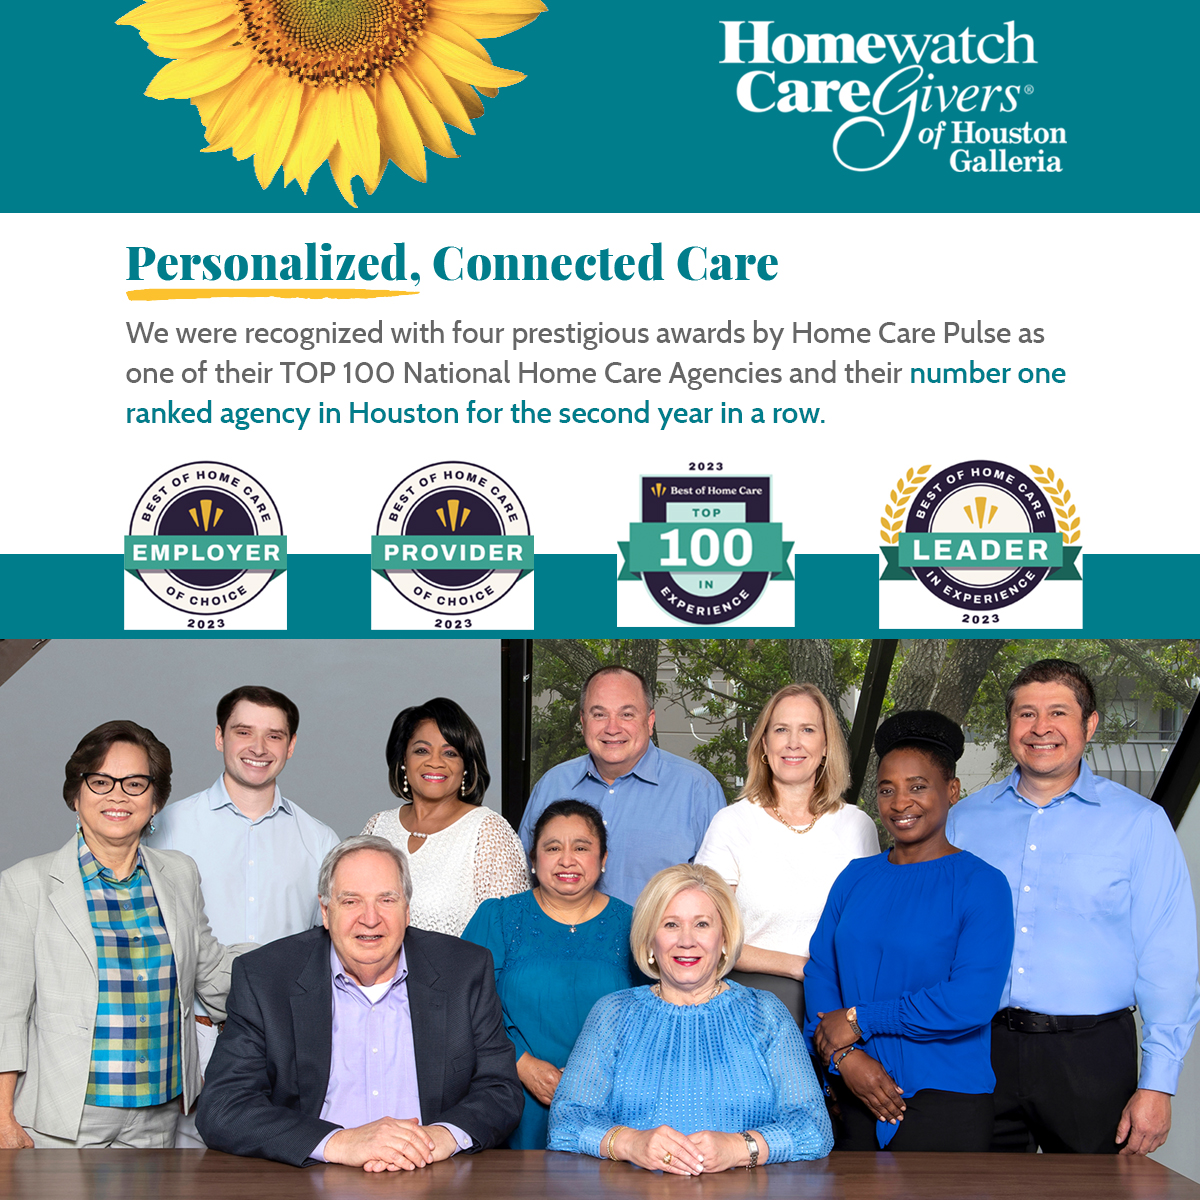 homewatch caregivers houston galleria staff and accolades image